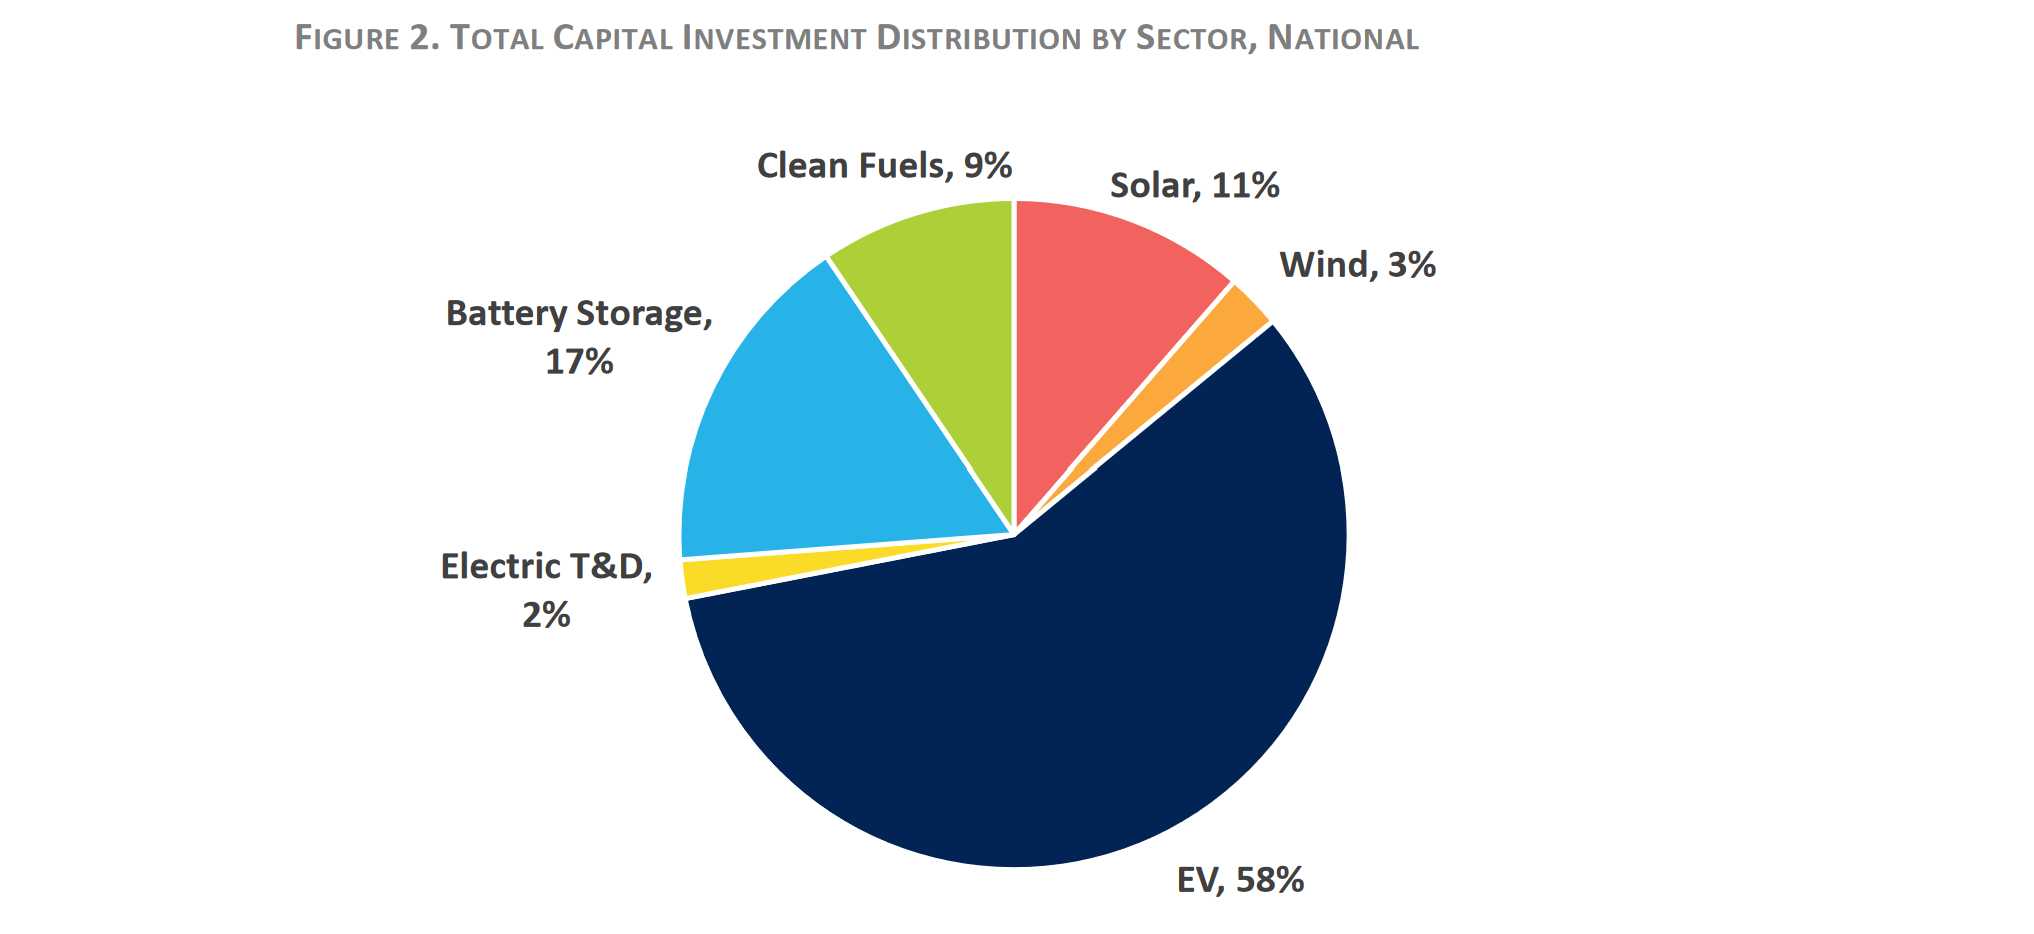 Graph depicting the total capital investment distribution by clean energy sector. Source: Clean Economy Works report by E2 and BW Research.